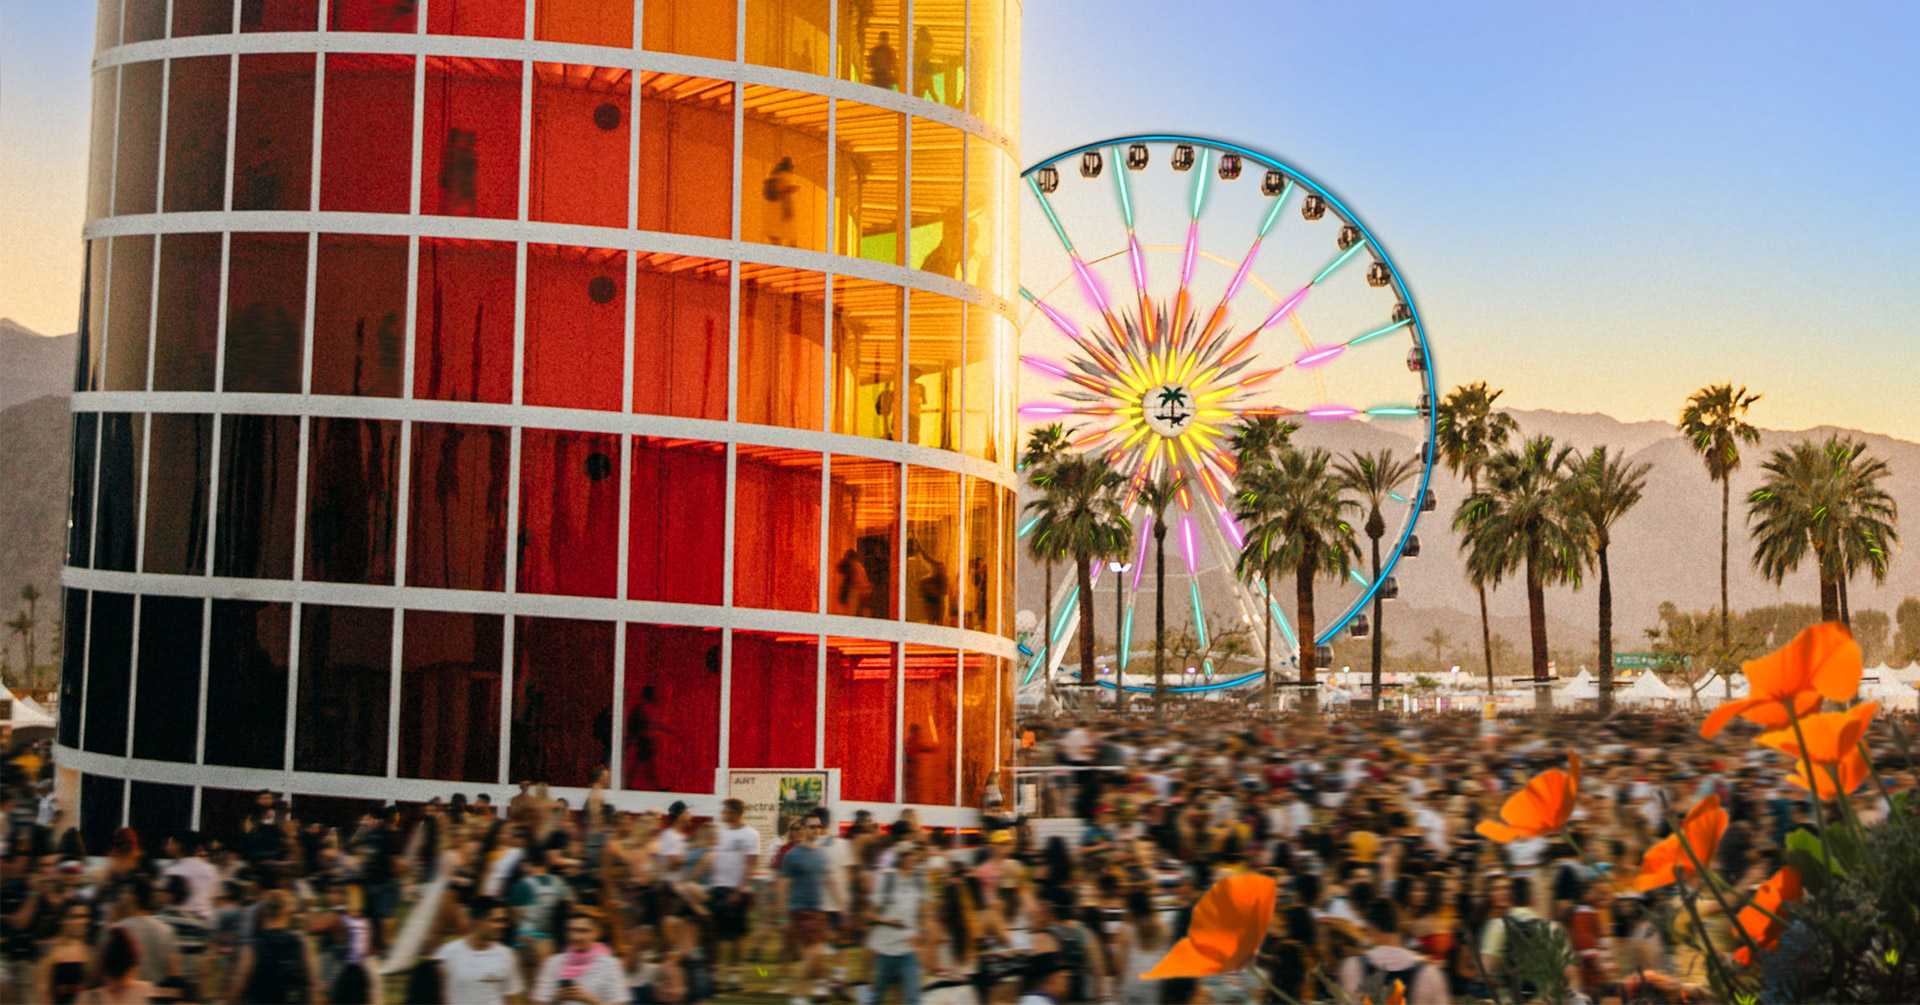 How the City of Indio Prepares for Coachella & Other Major Events